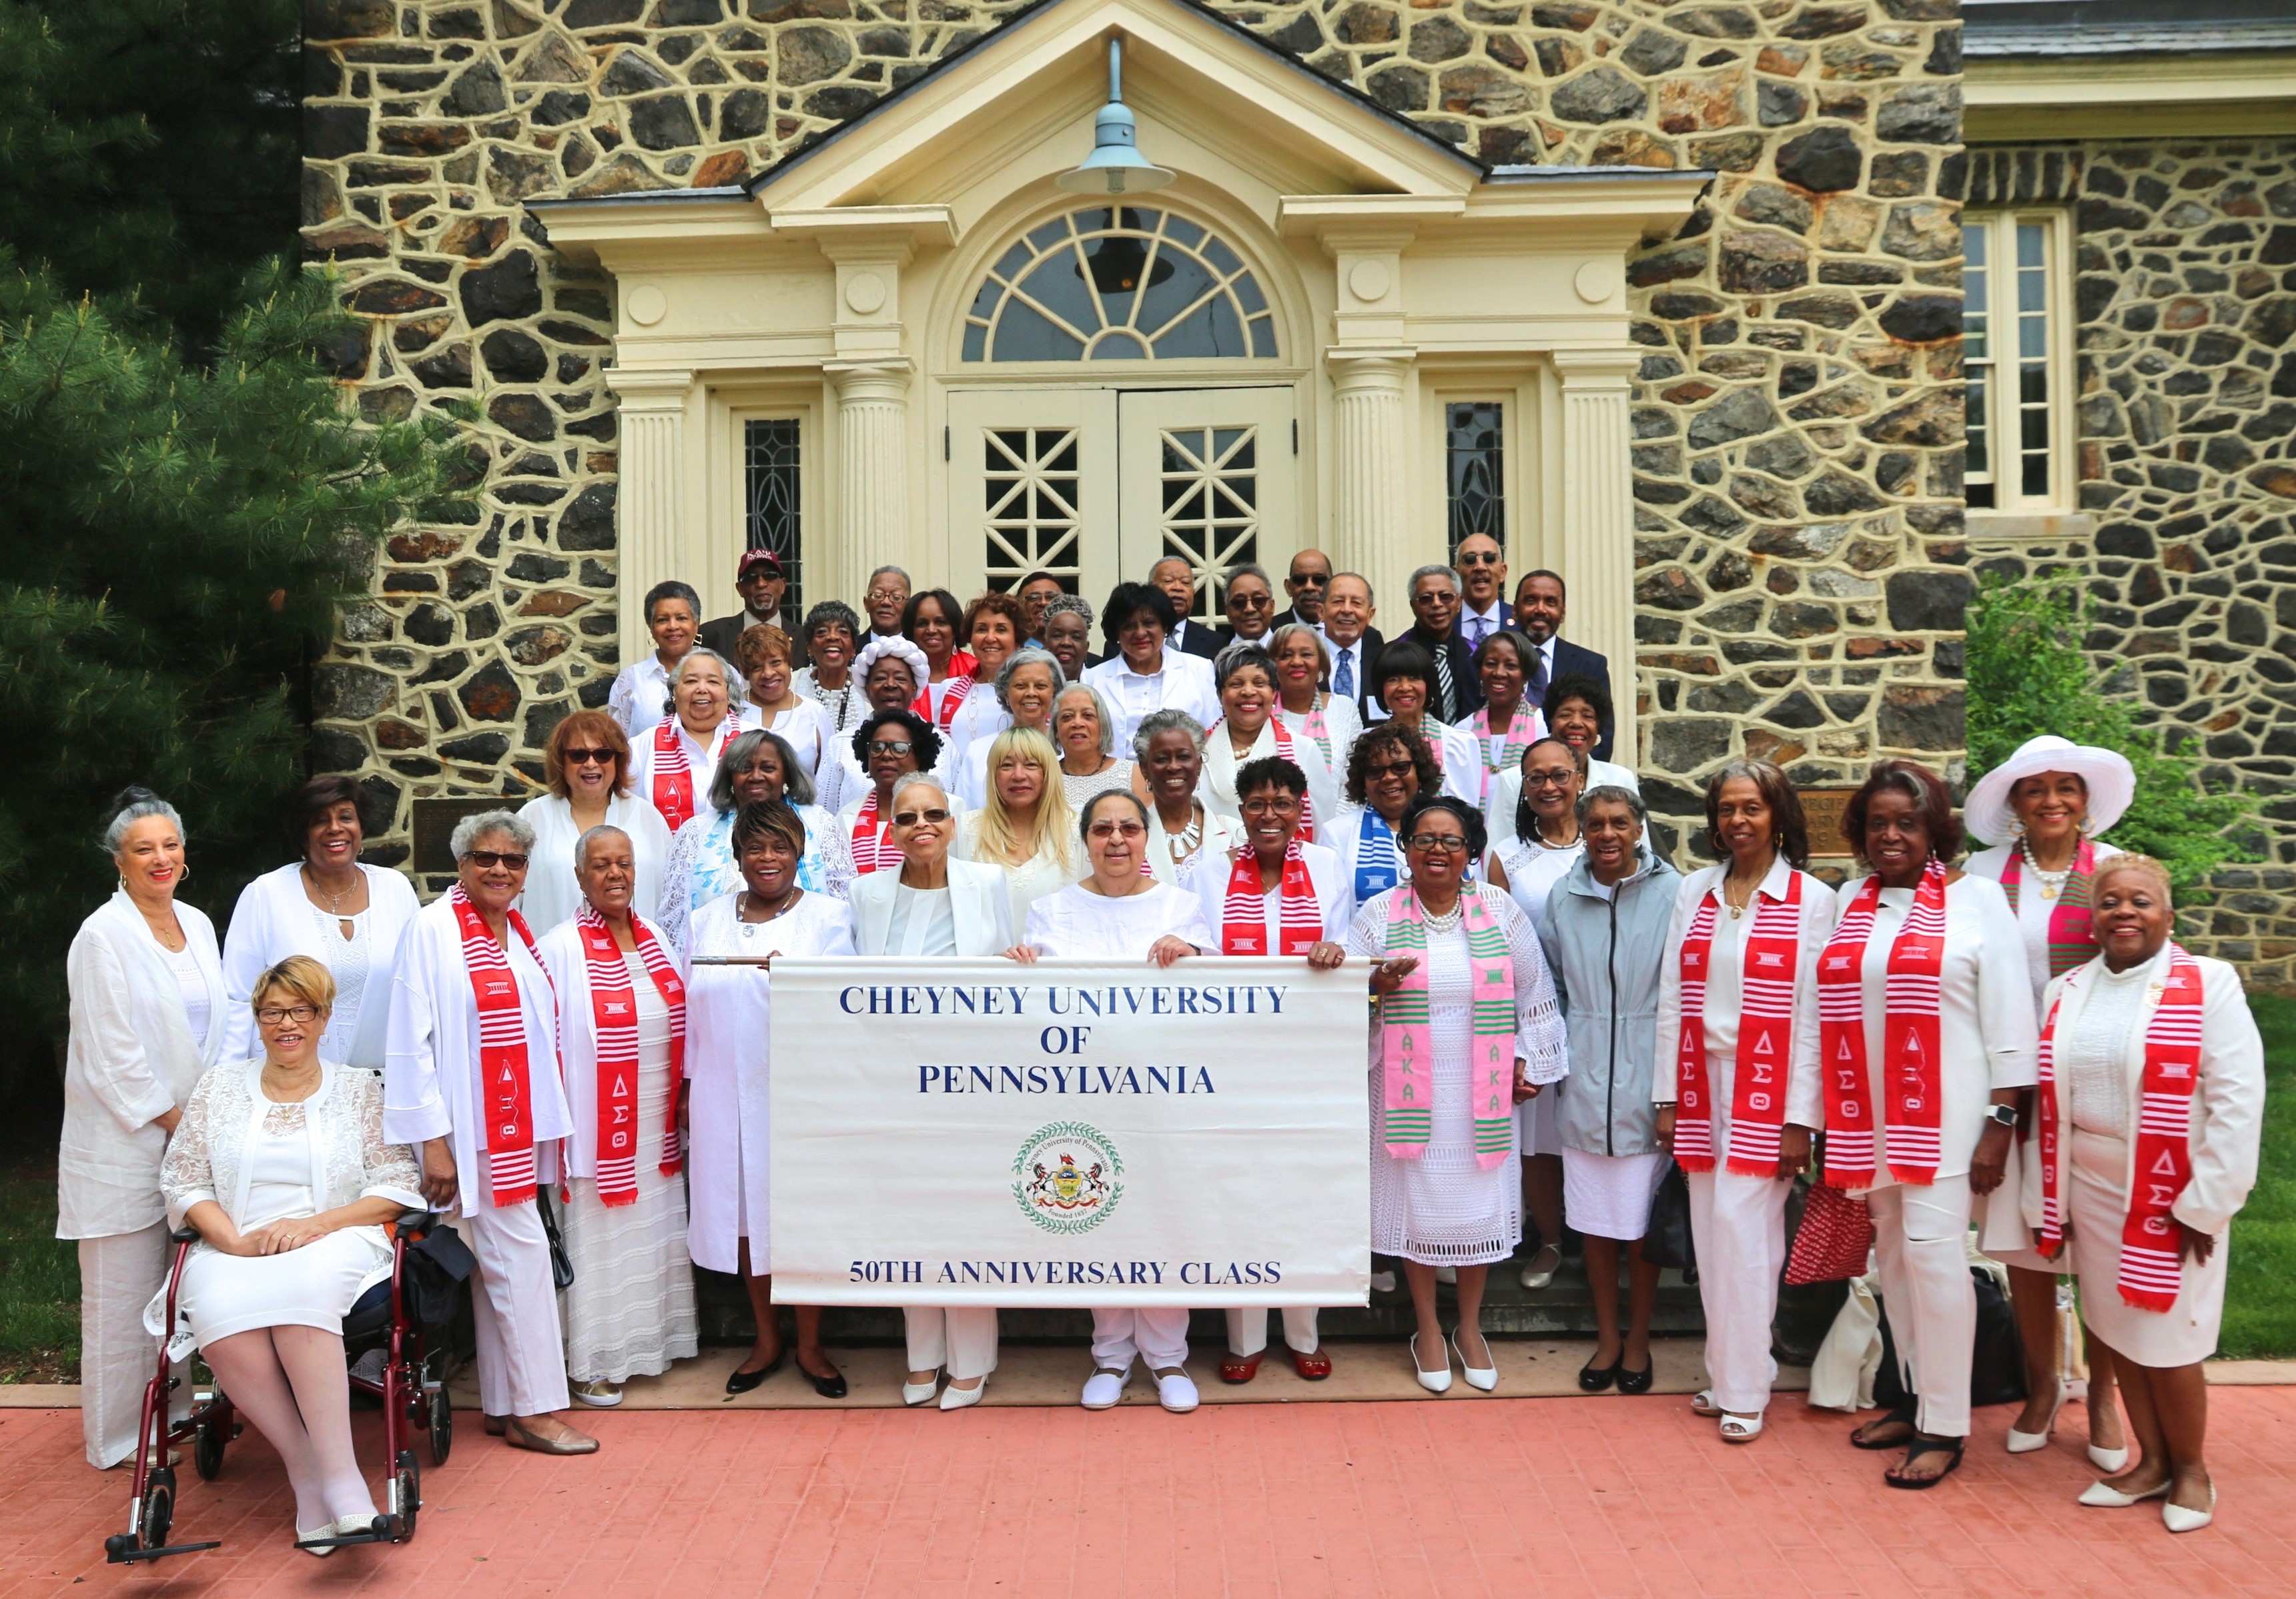 Commencement 2018: Cheyney Class of 1968 is Honored on 50th Anniversary of Graduation